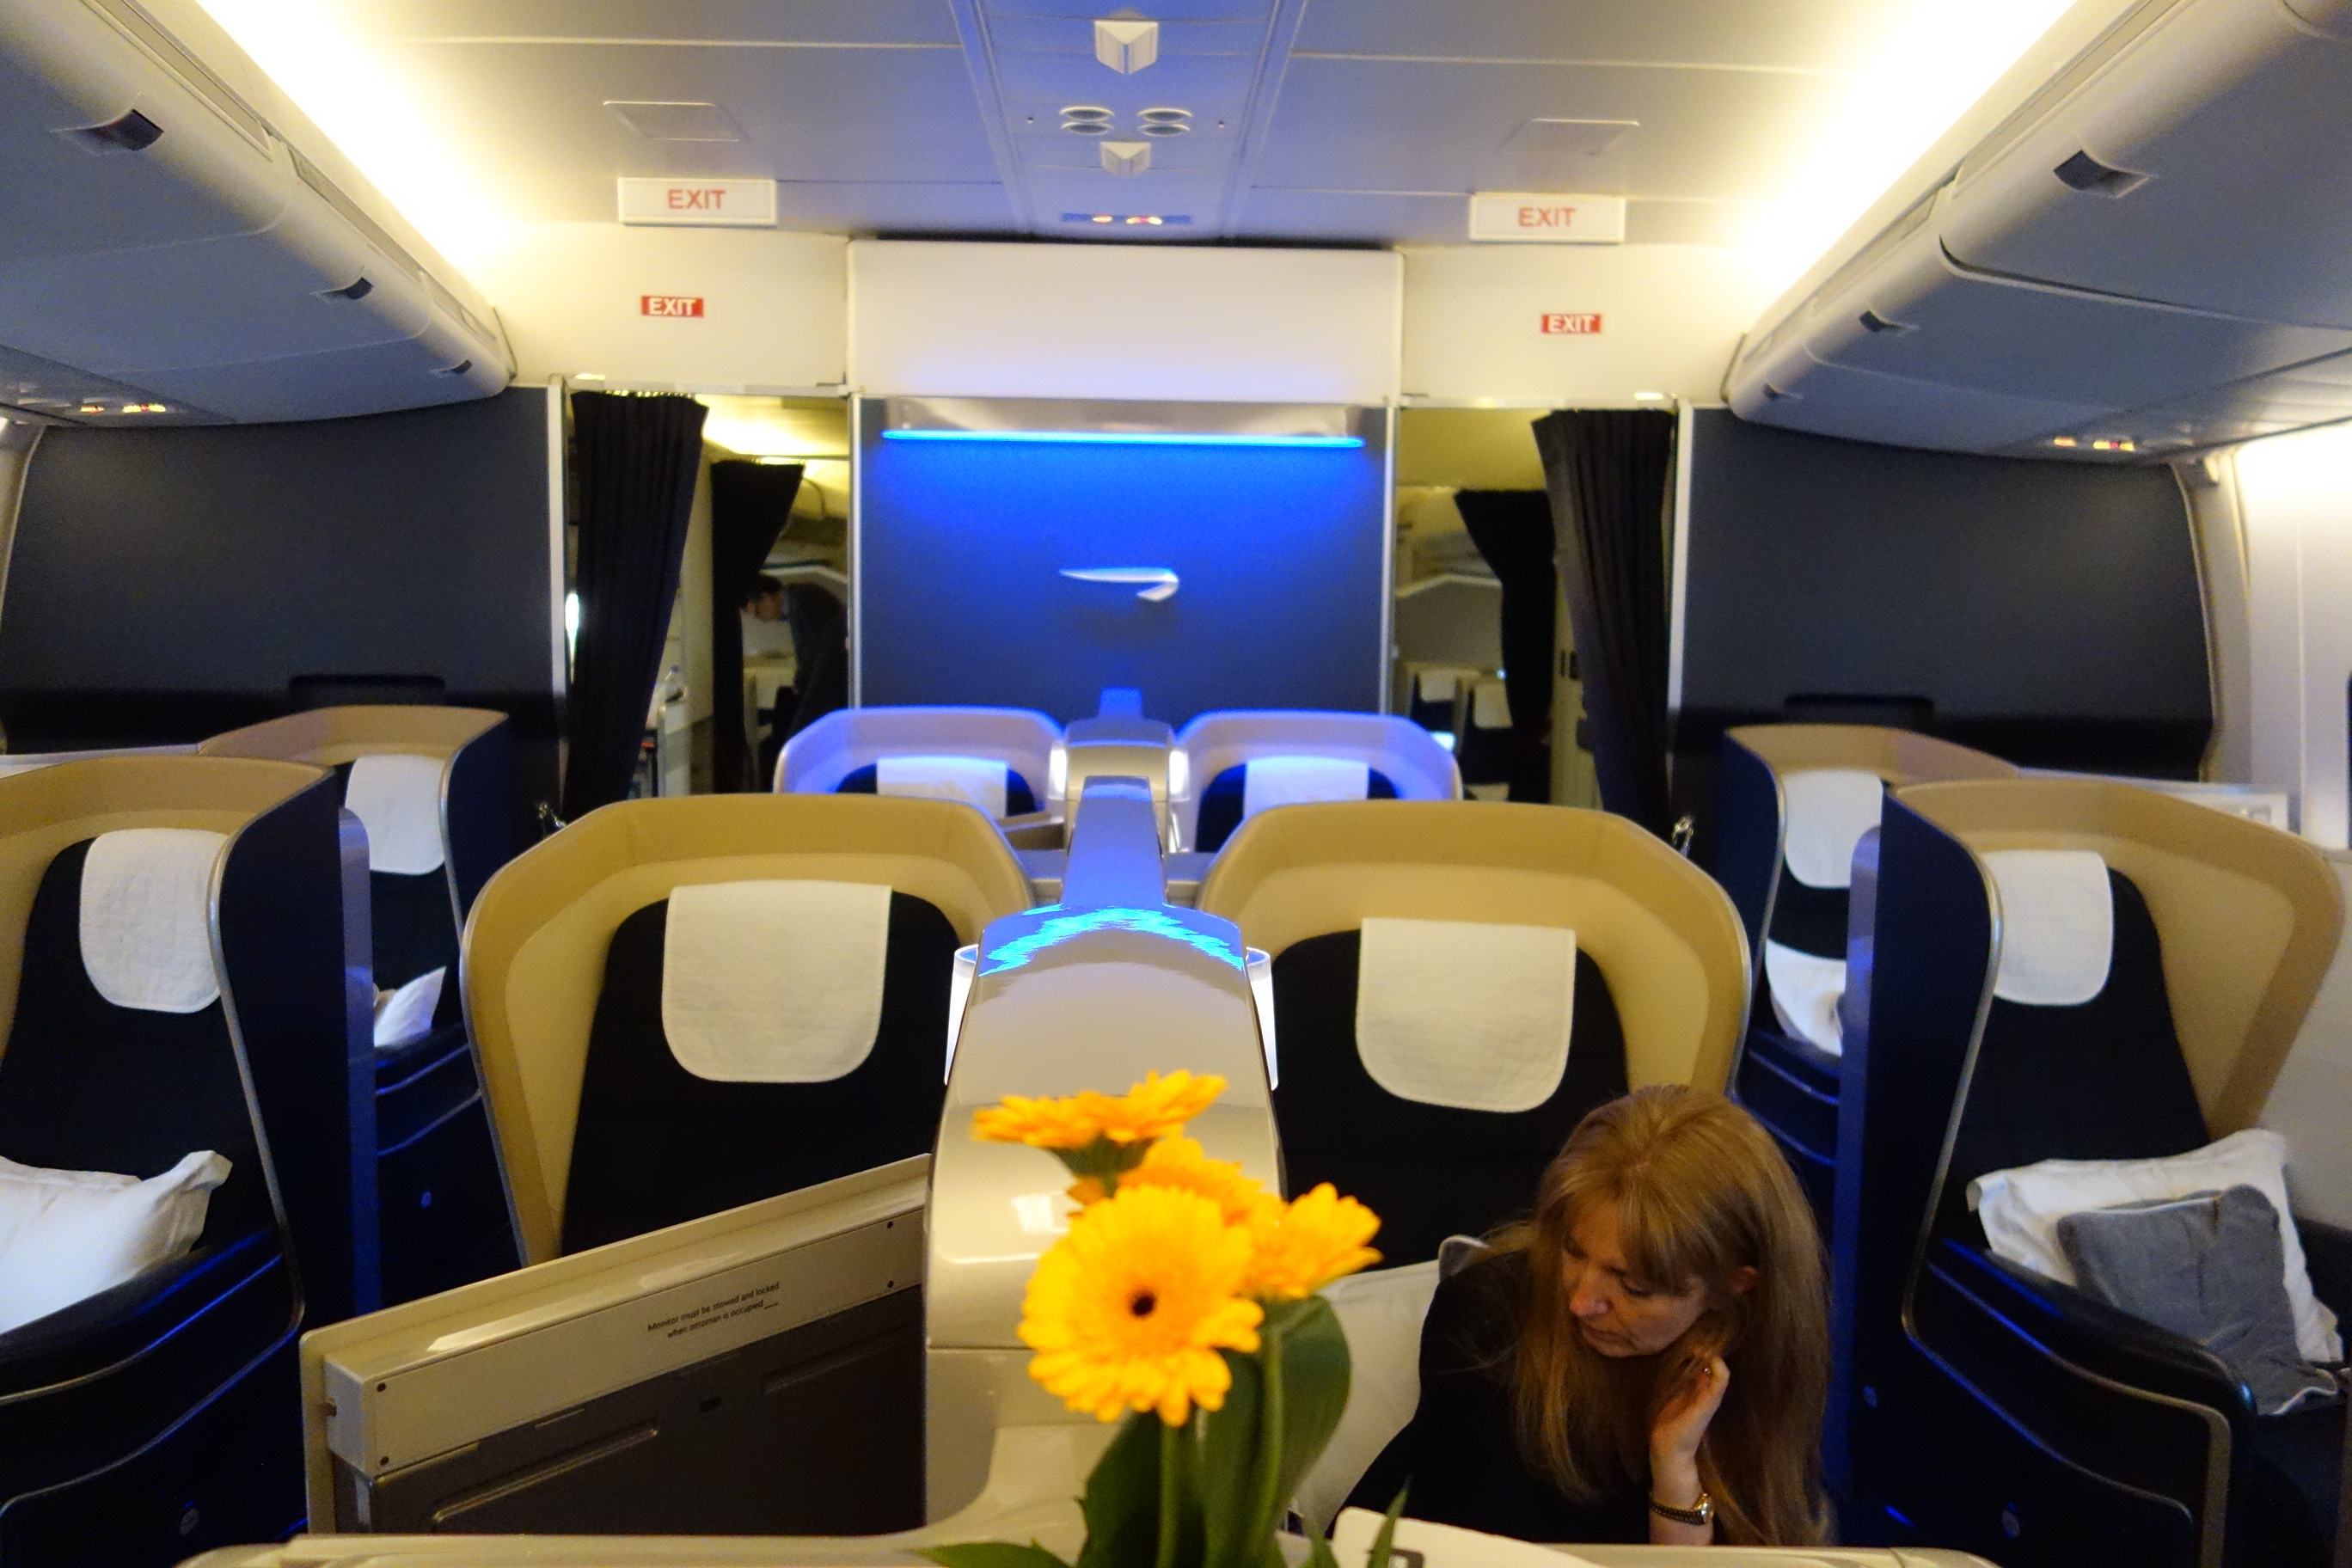 More views of first class cabin